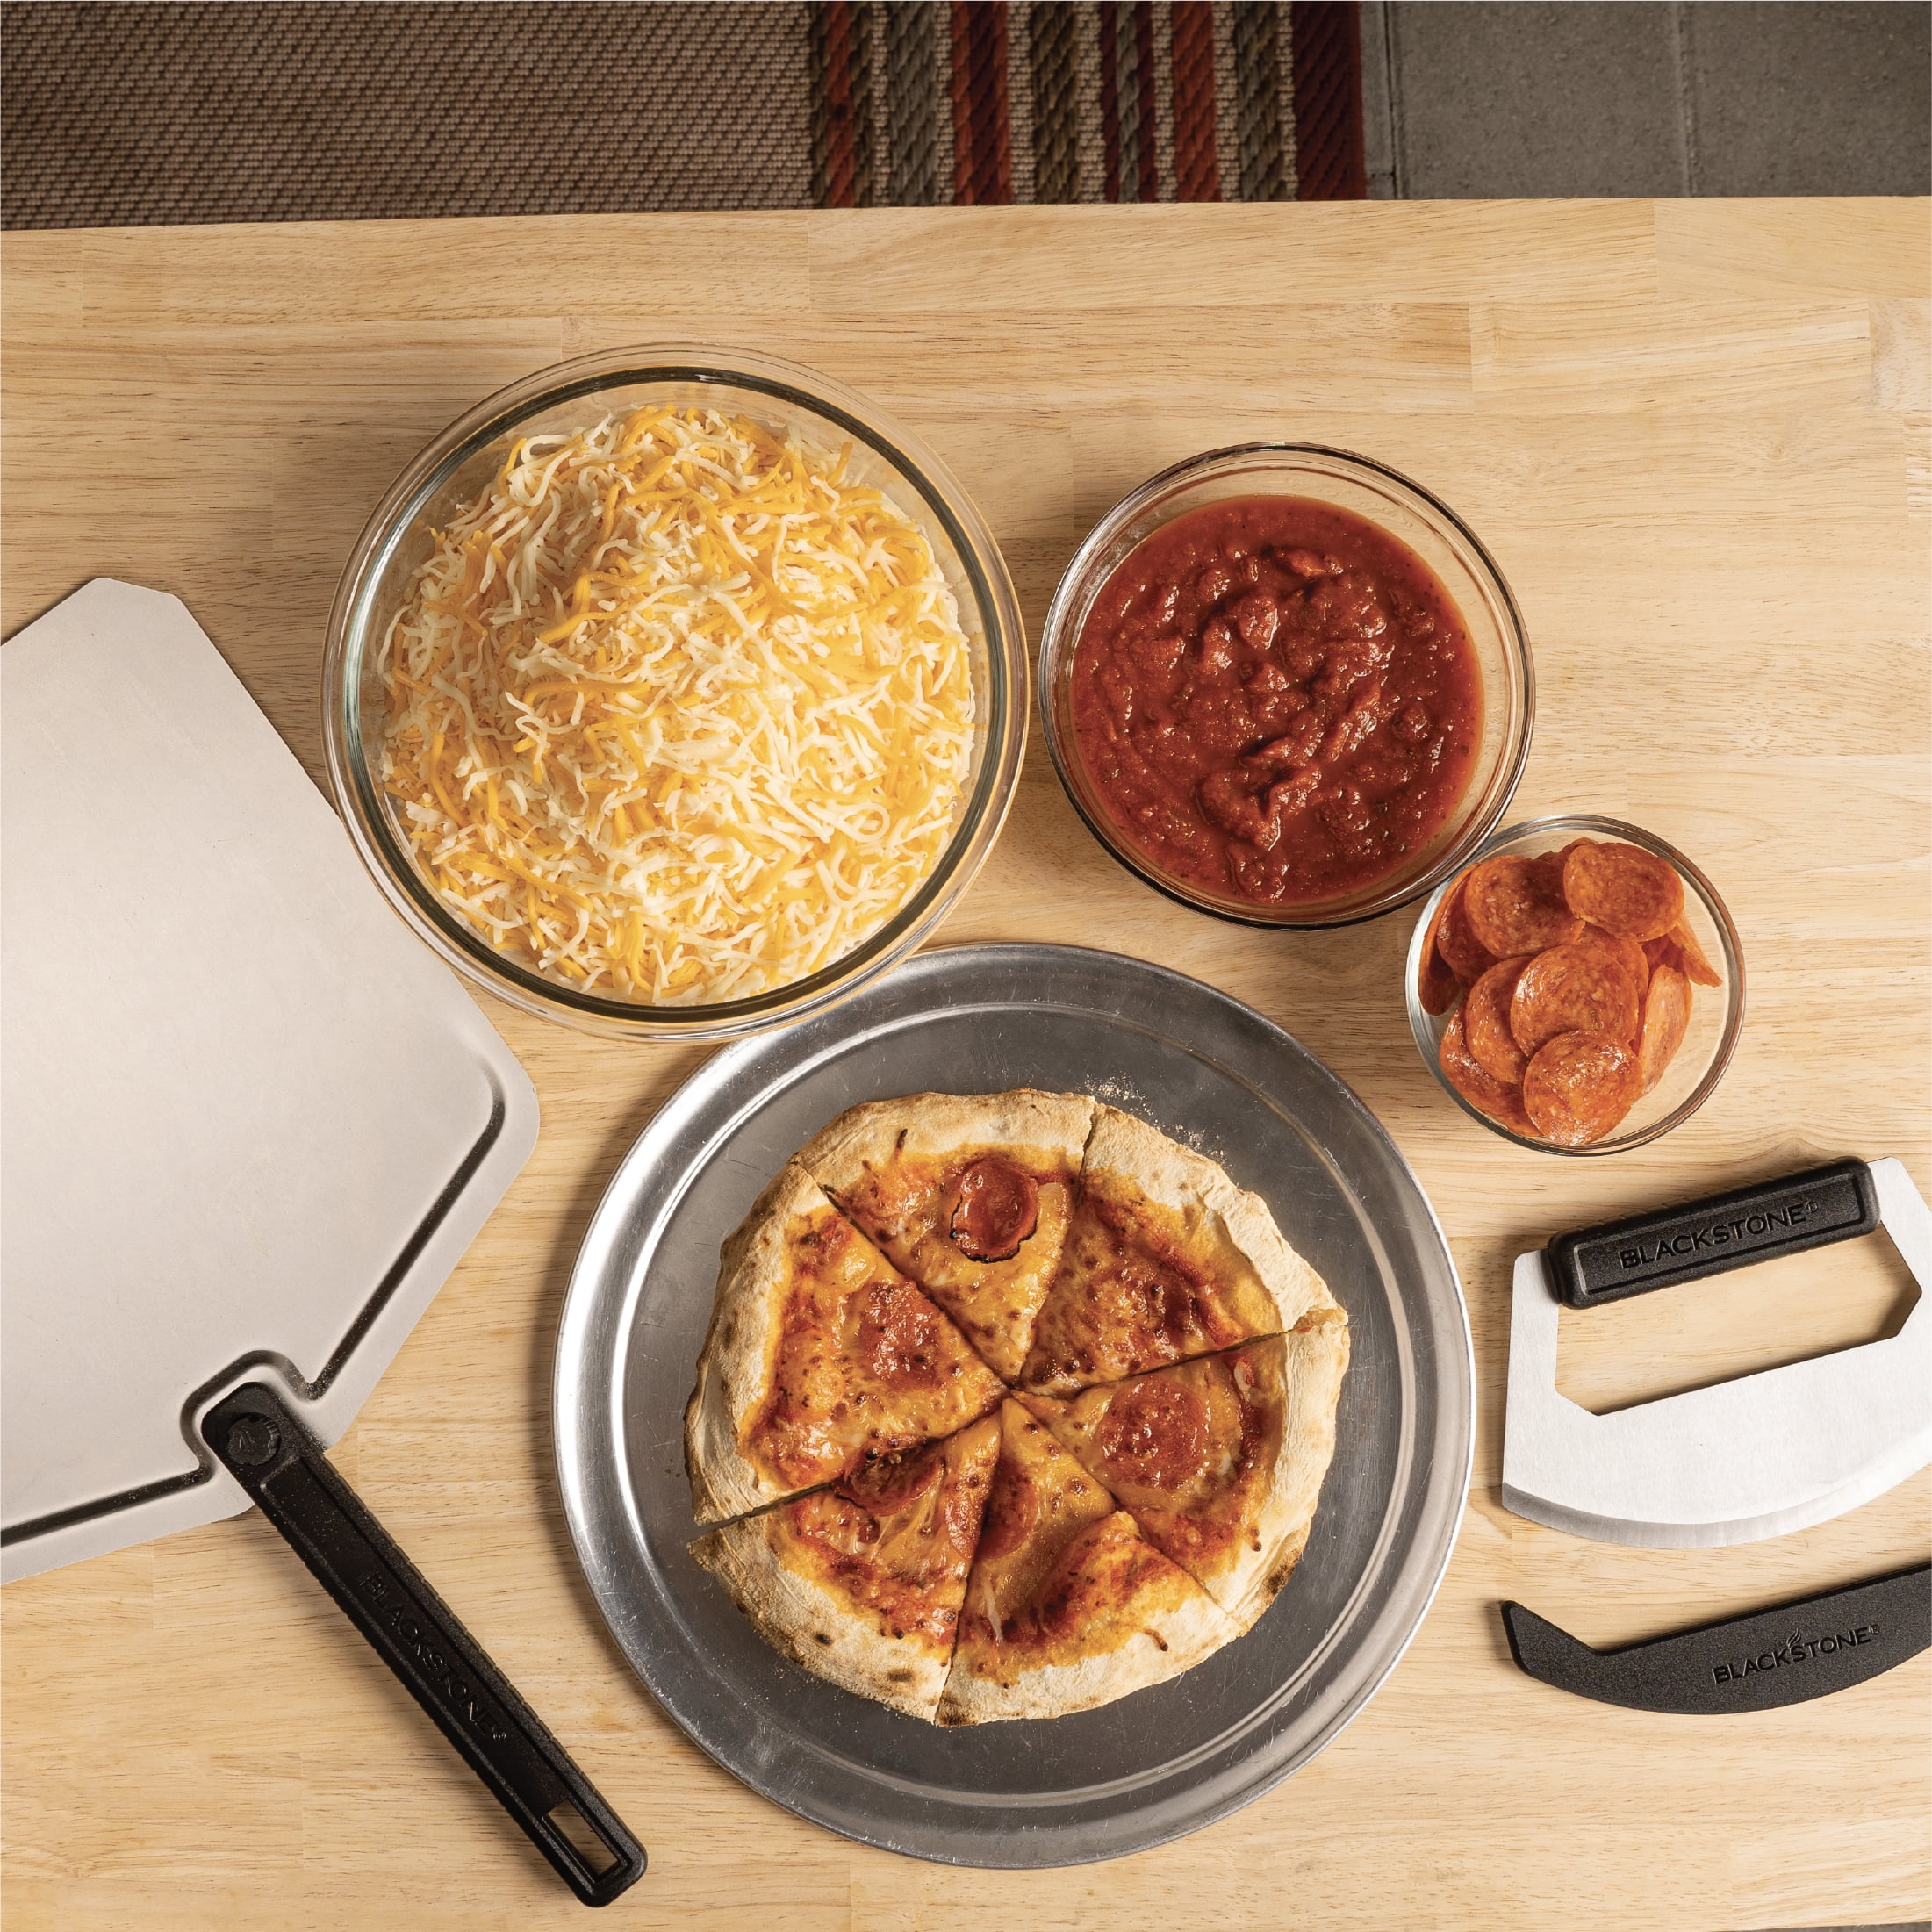 Blackstone Pizza Kit with Aluminum Tray, 3-Piece Peel, Pizza Cutter, and